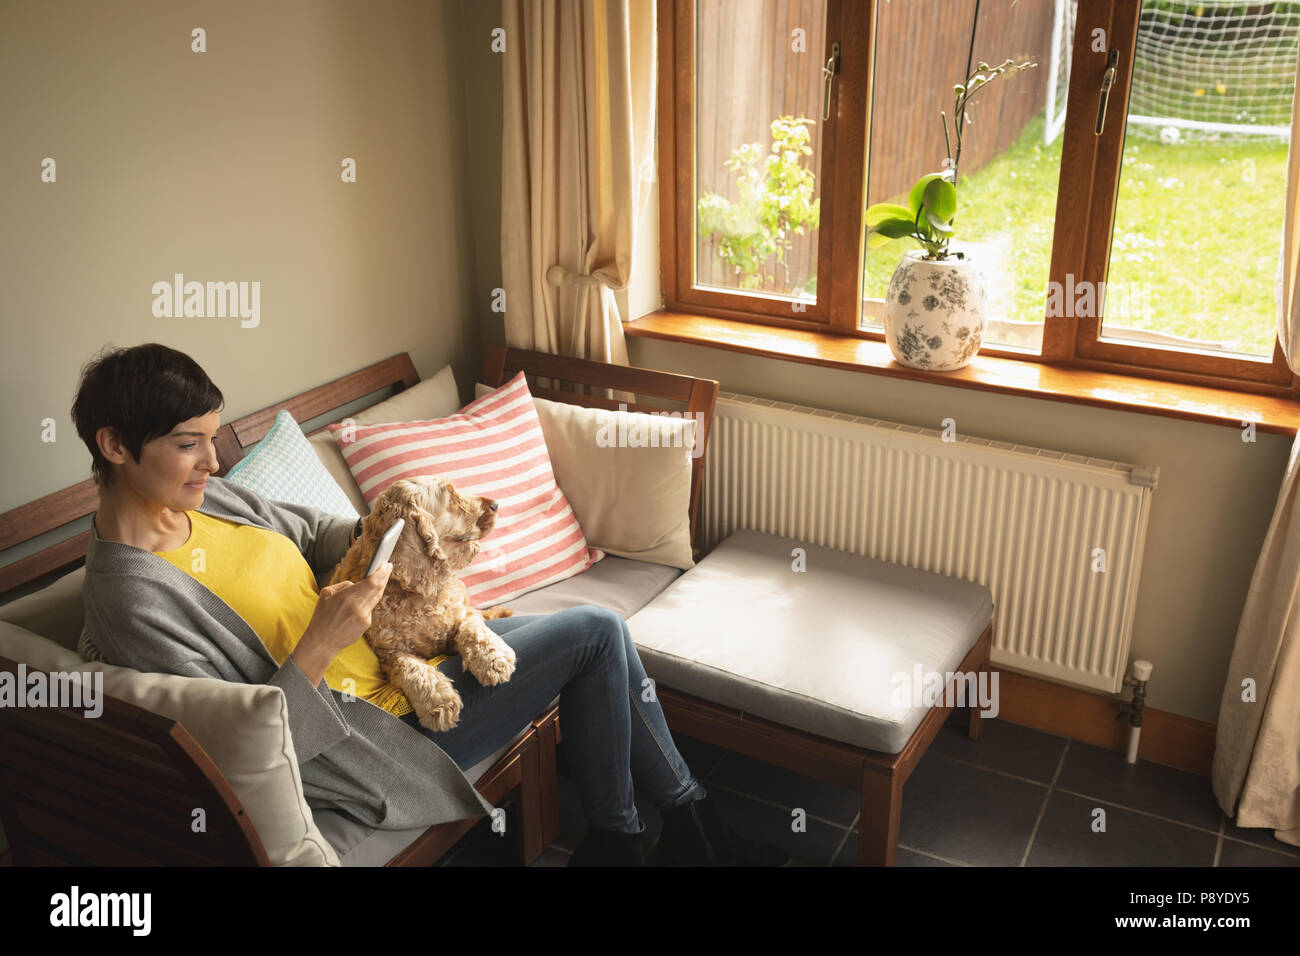 Woman using mobile phone with dog on sofa in living room Banque D'Images